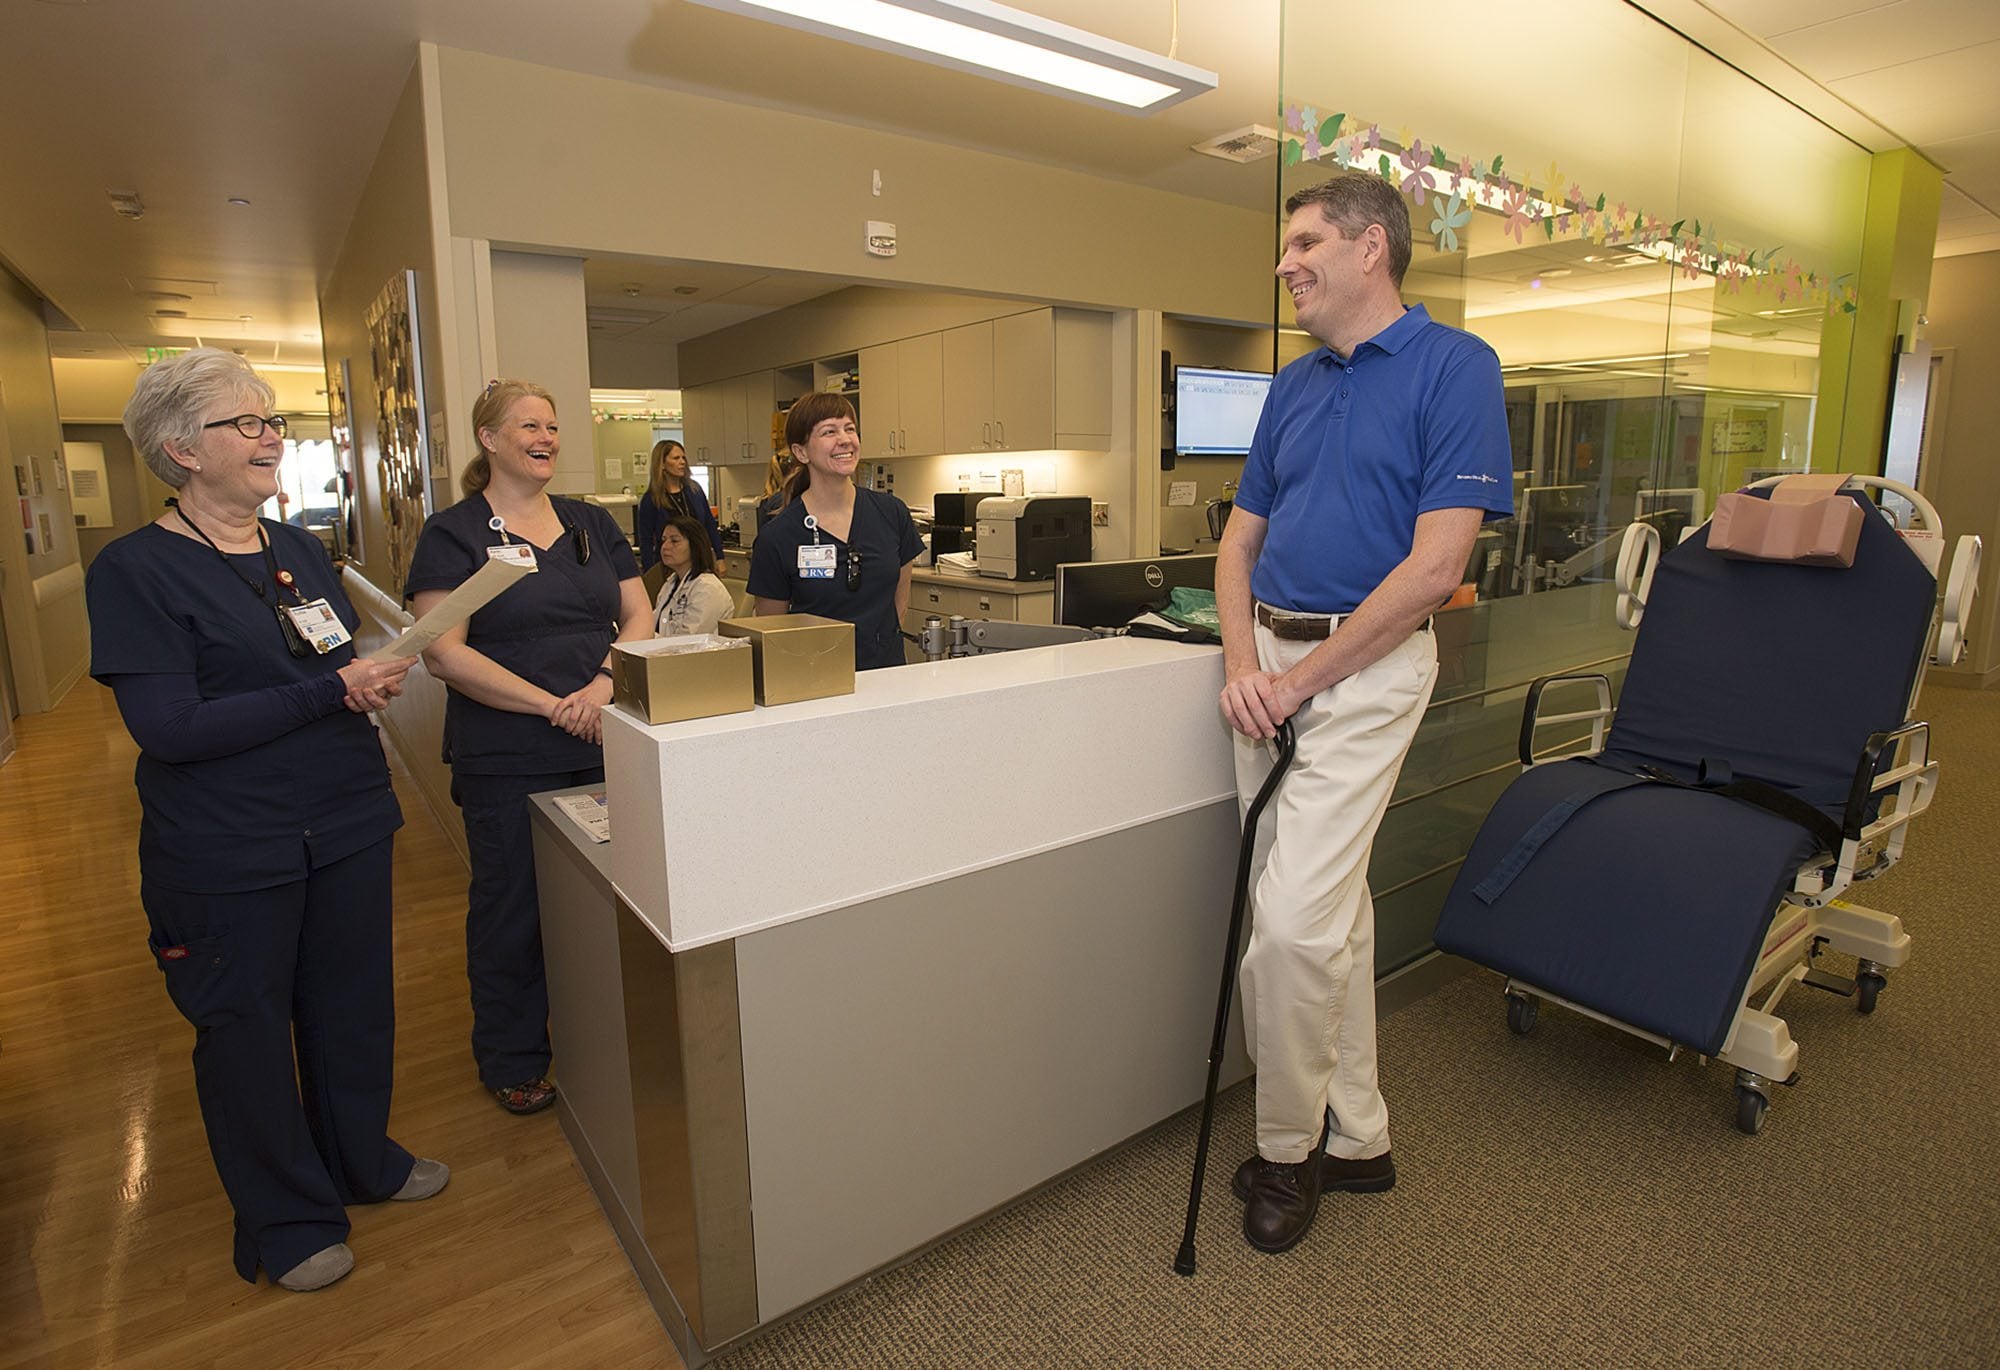 ICU nurses Ruthie DeWitt, from left, Karin Osgood and Rebecca Morris share a laugh with Rick Jarvis of Camas on Thursday morning, March 10, 2016 at PeaceHealth Southwest Medical Center as he visits the unit to thank the staff for caring for him following a car accident that nearly took his life.